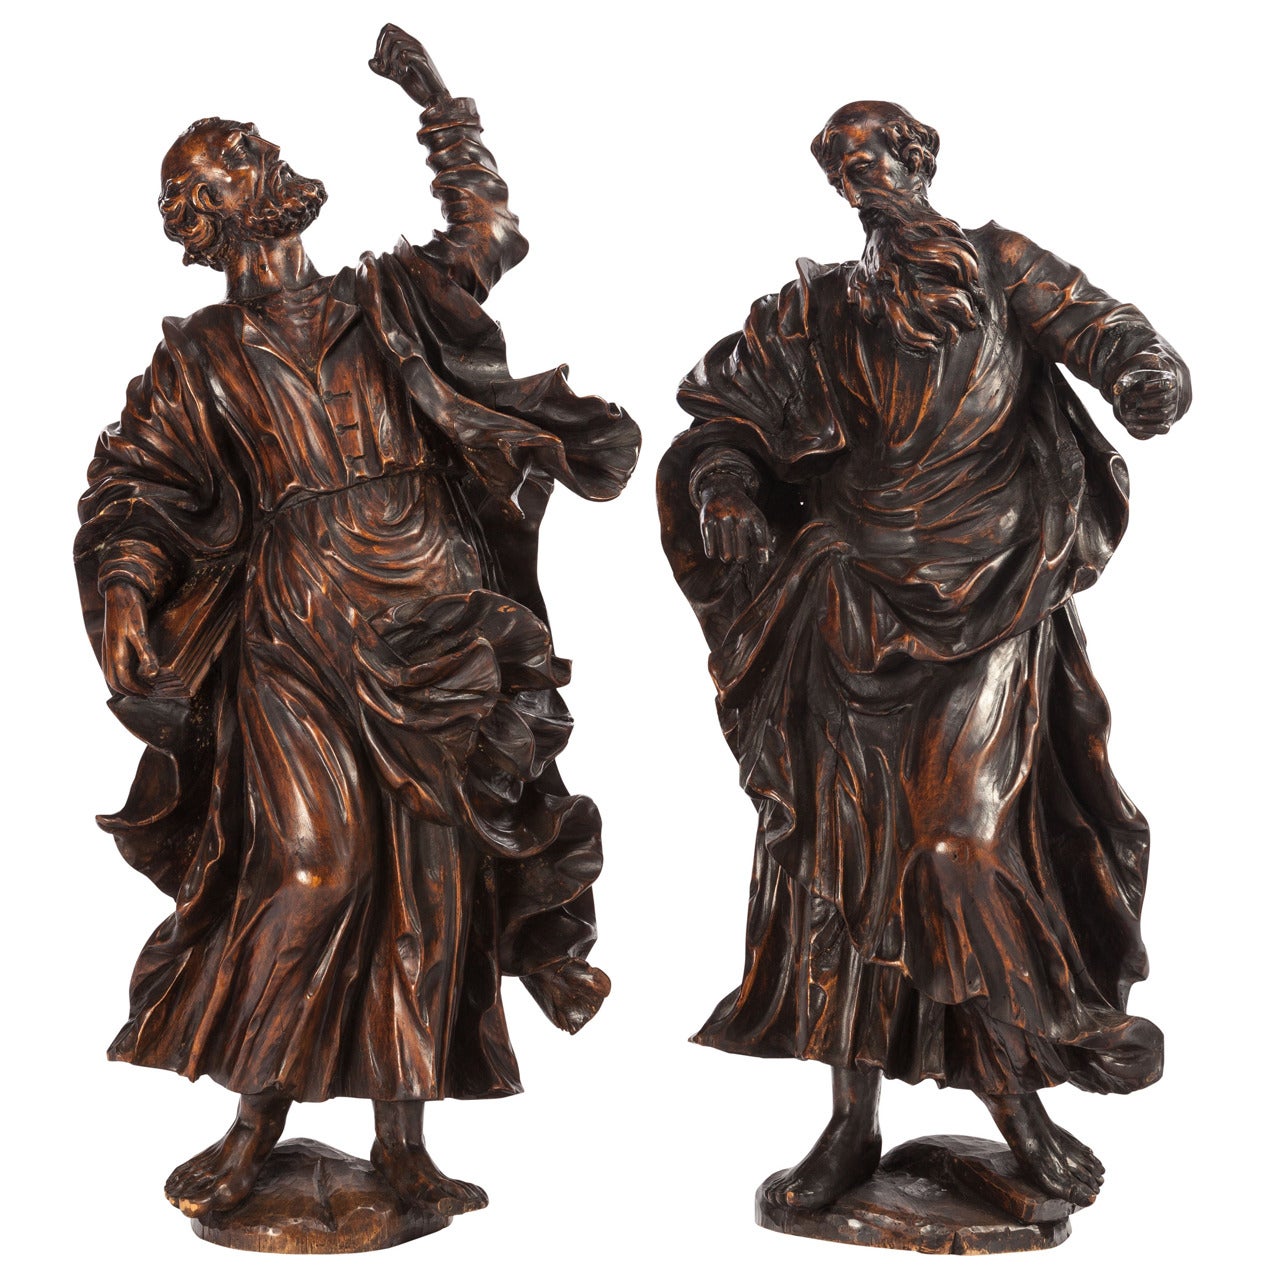 Pair of Carved 18th Century Statues from Italy